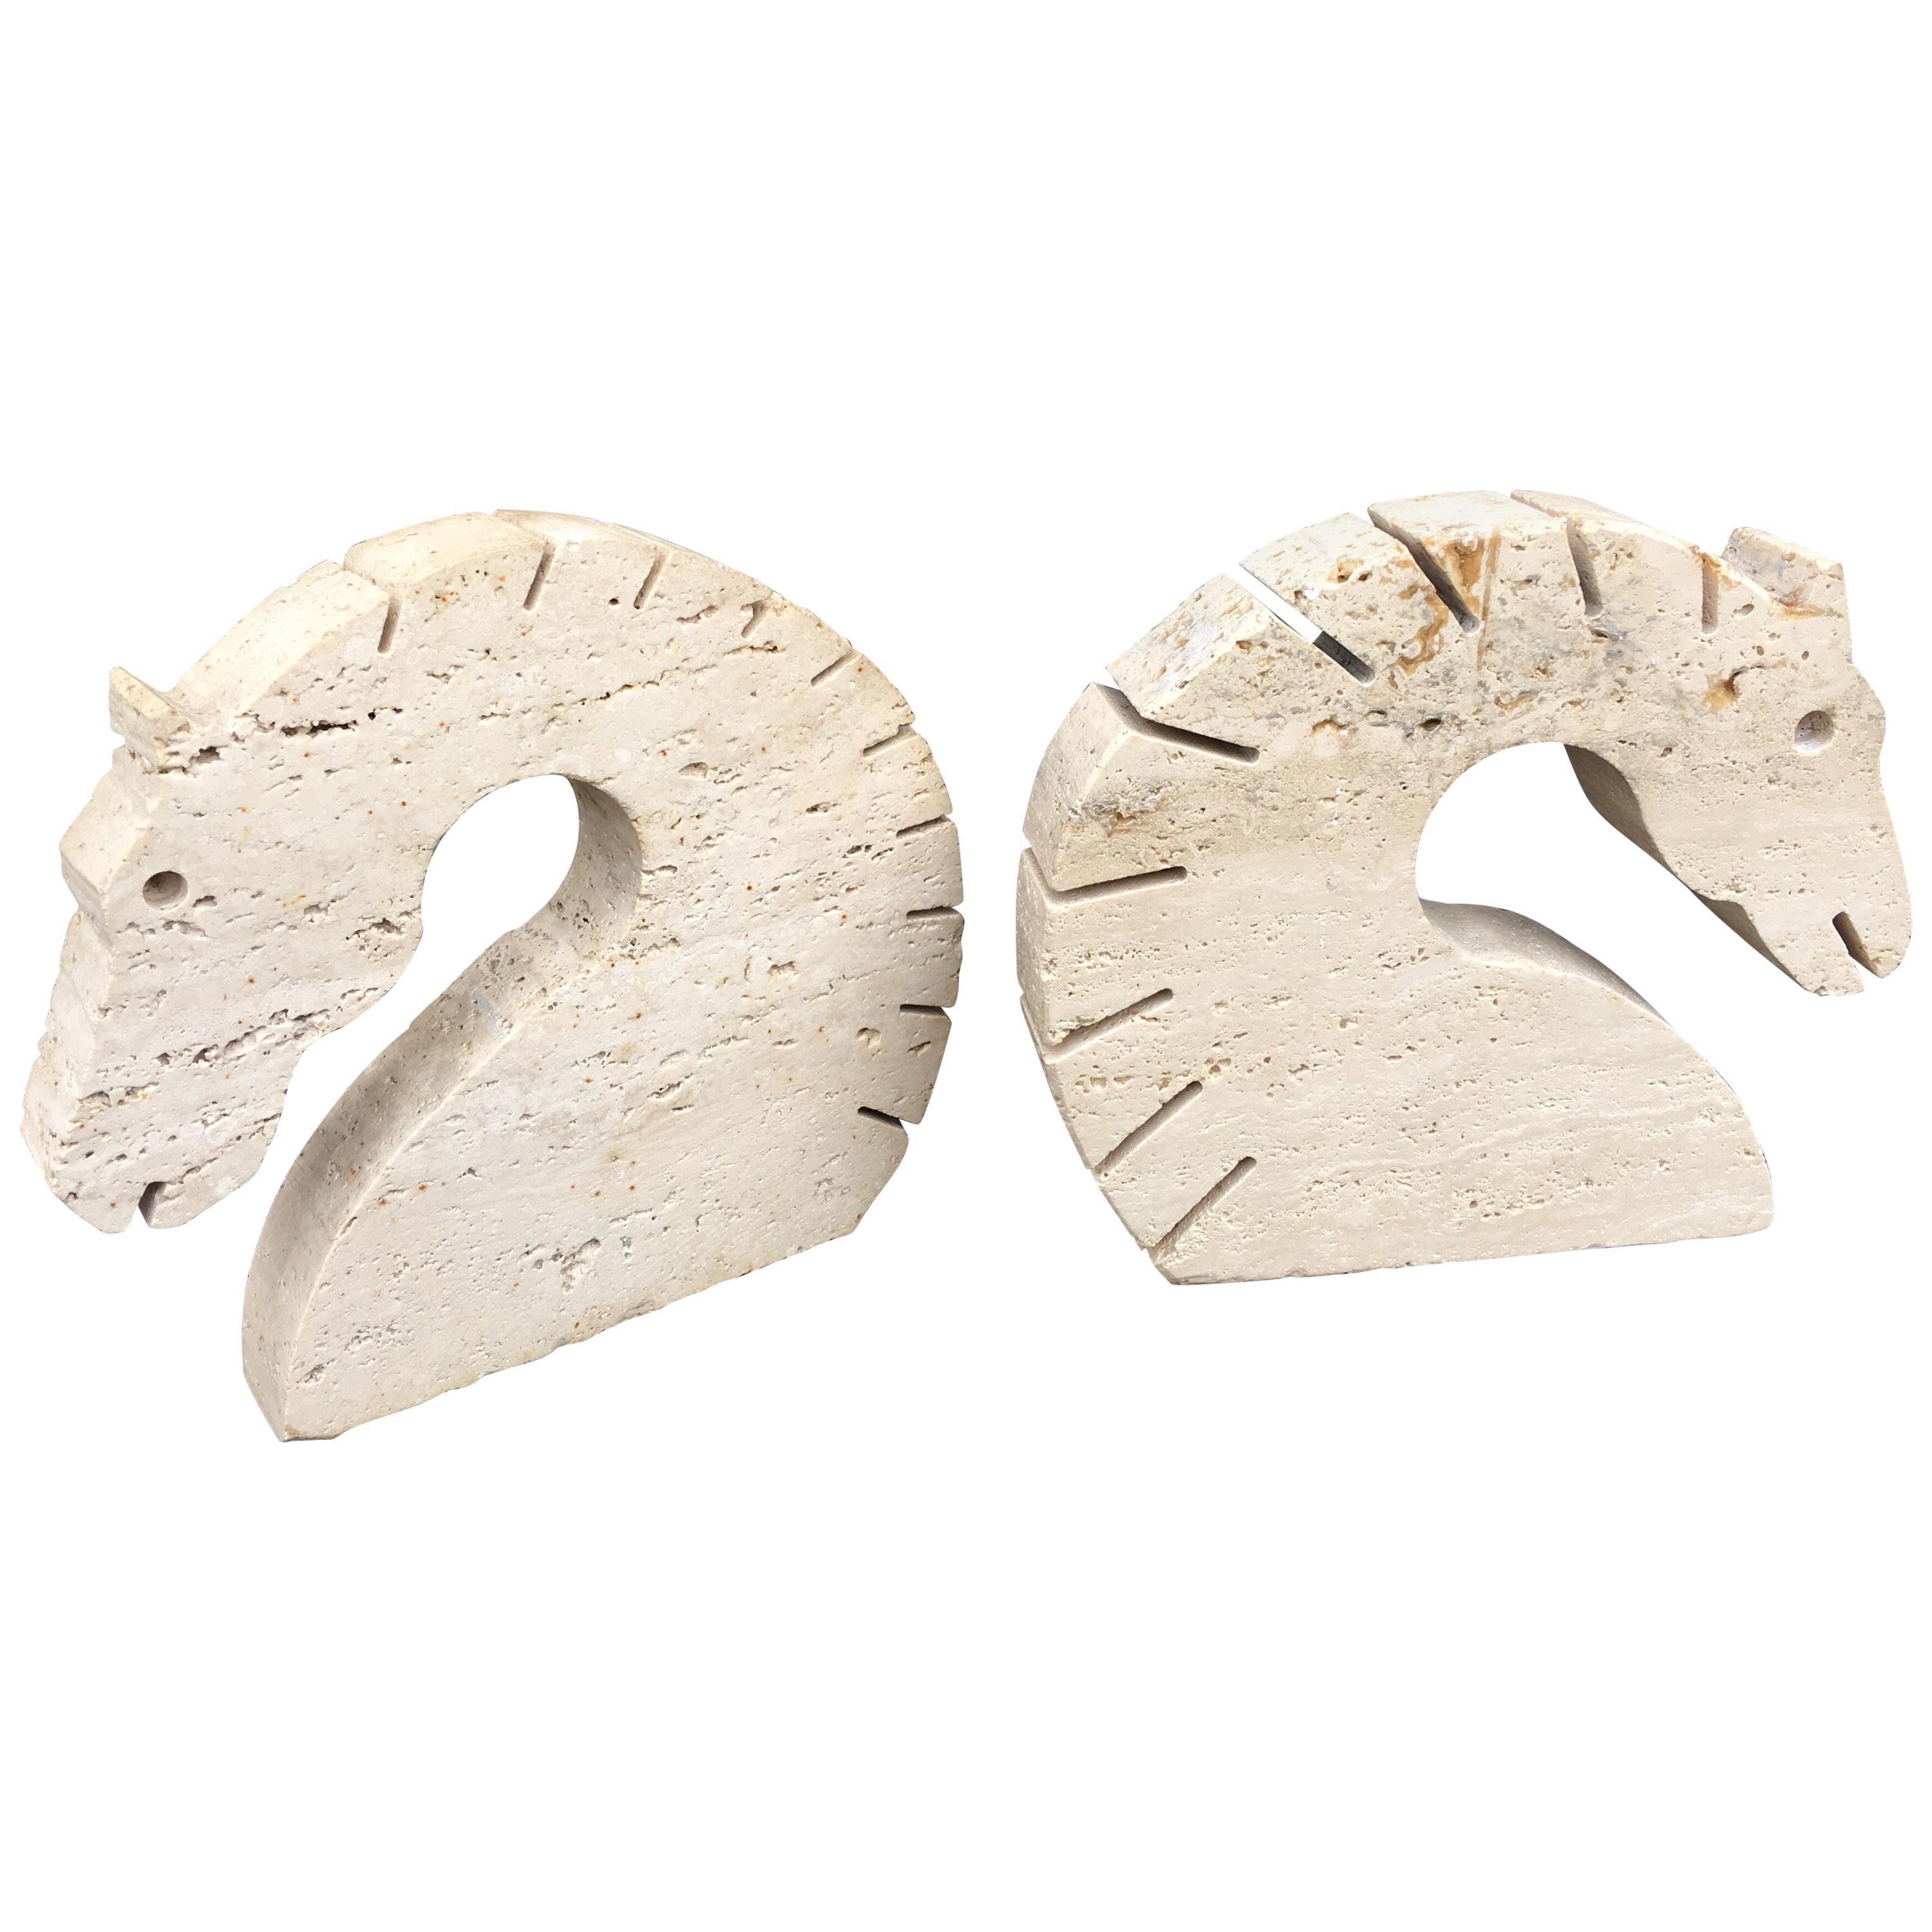 Travertine Marble Horse Head Bookends by Fili Mannelli for Raymor